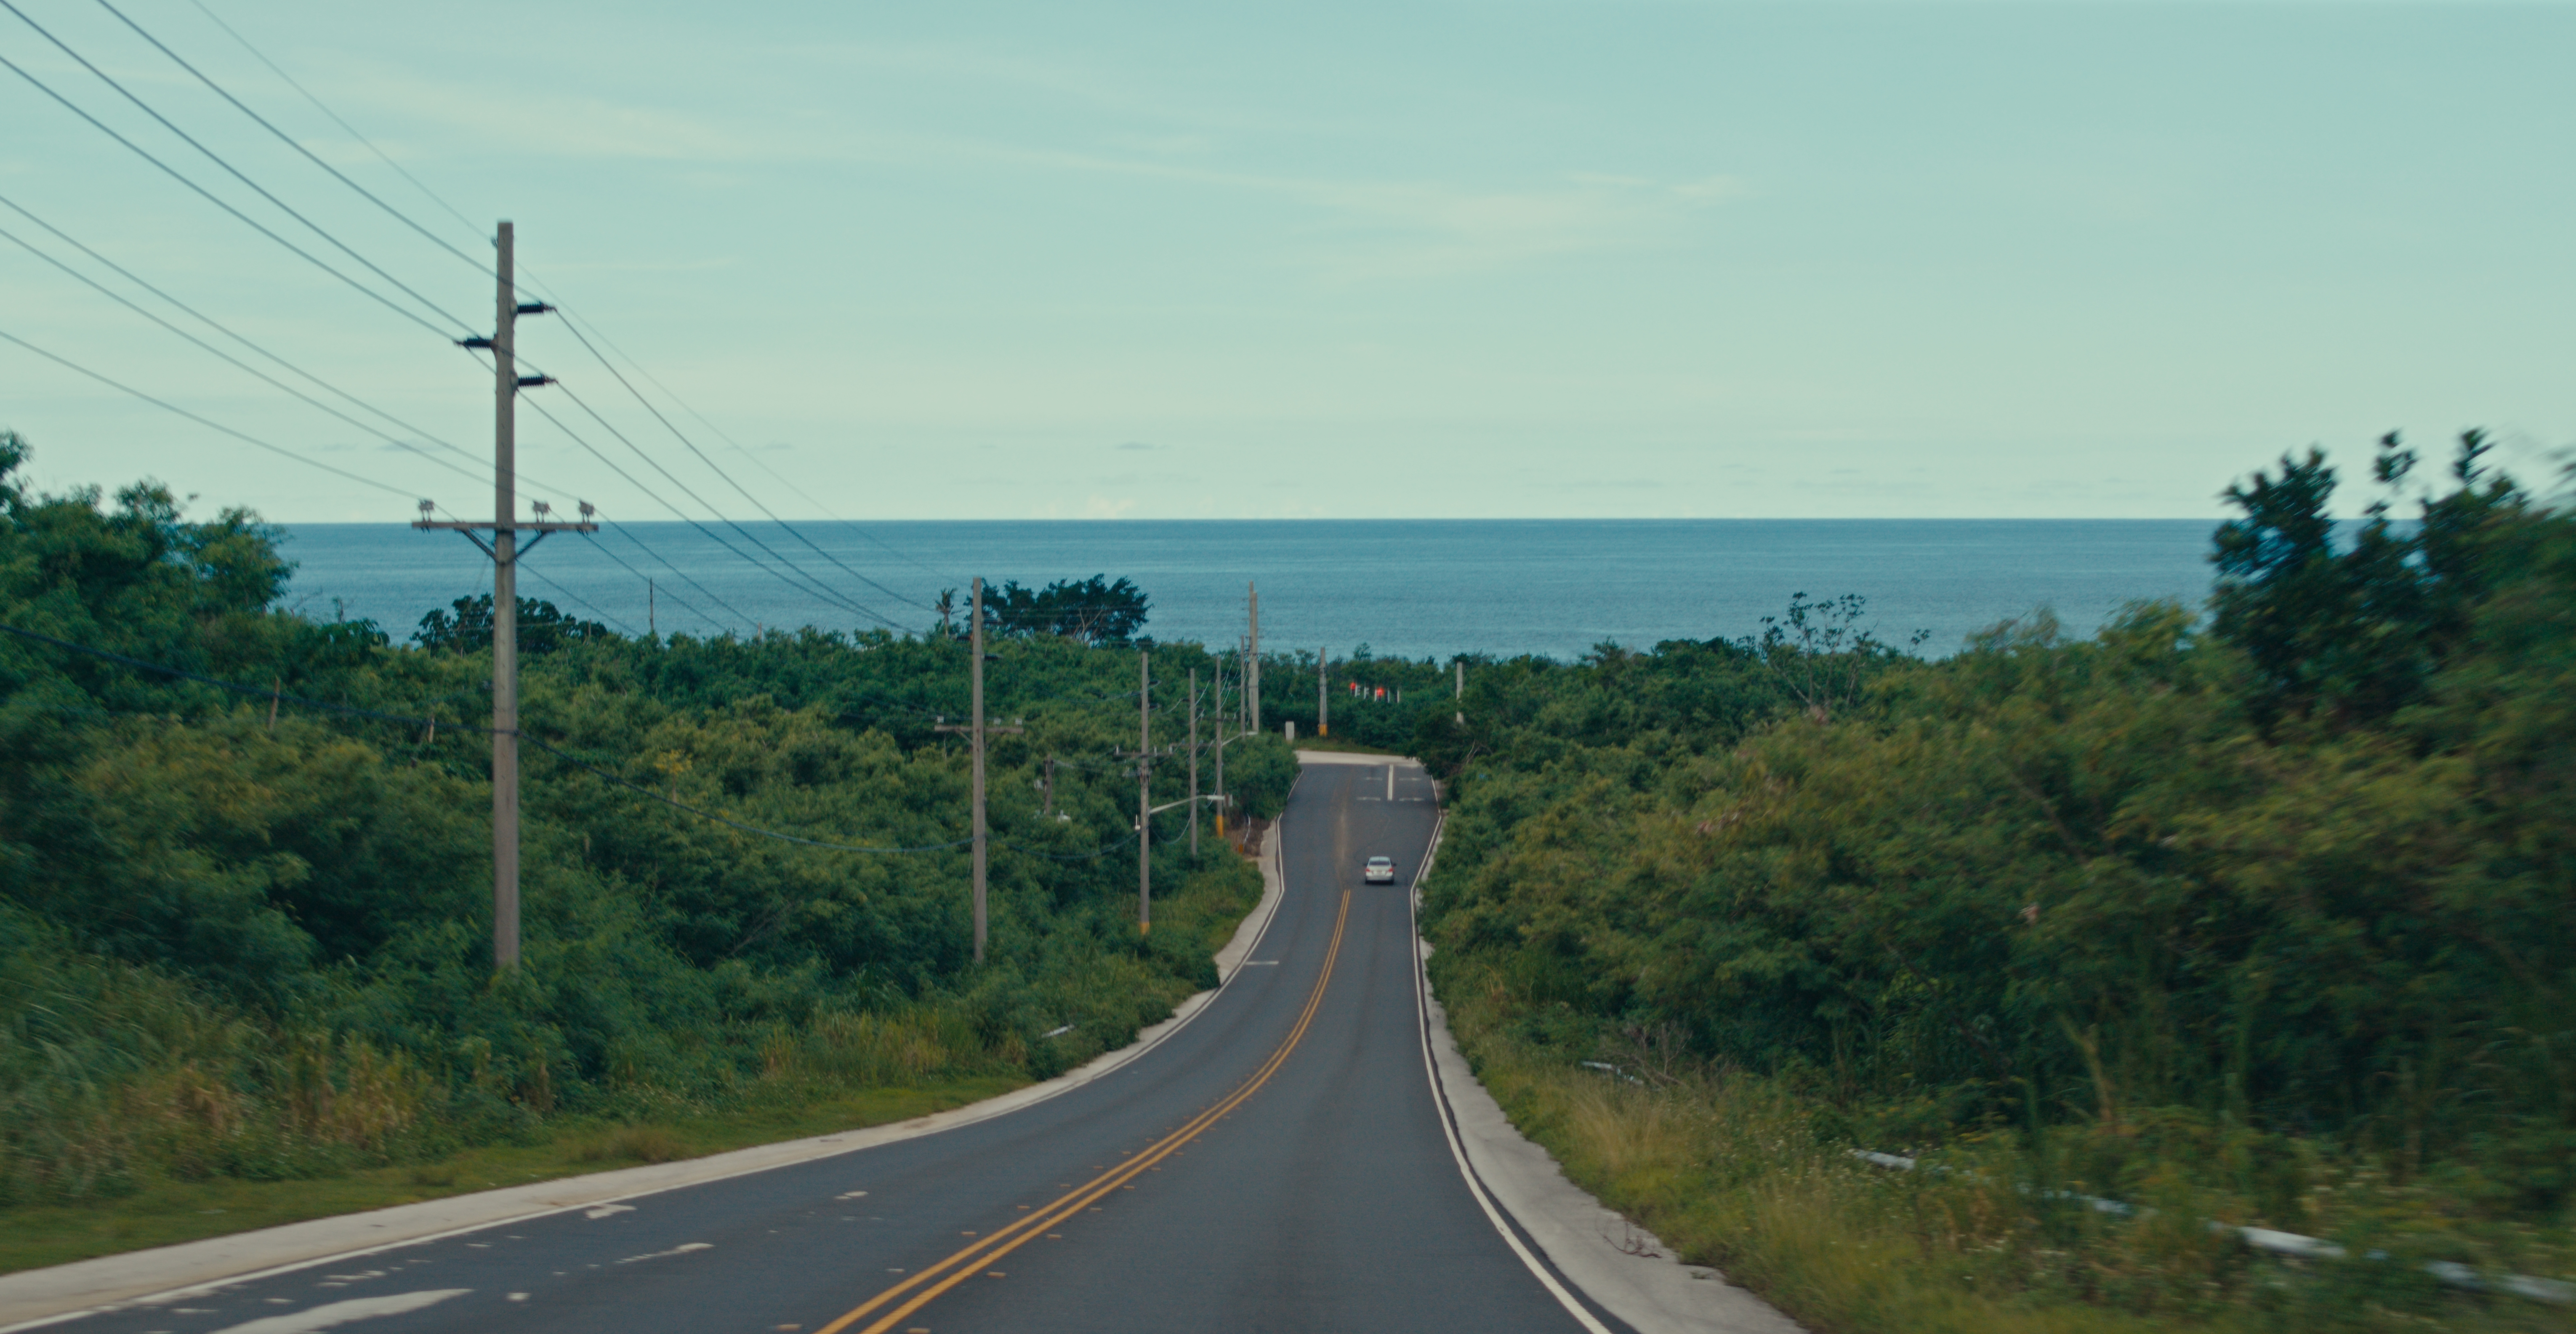 A film still from Wouldn't Make It Any Other Way that shows a long stretching two way road leading towards the ocean. On either side of the road are luscious trees and greenery, and on the right hand side there is also a telephone line.